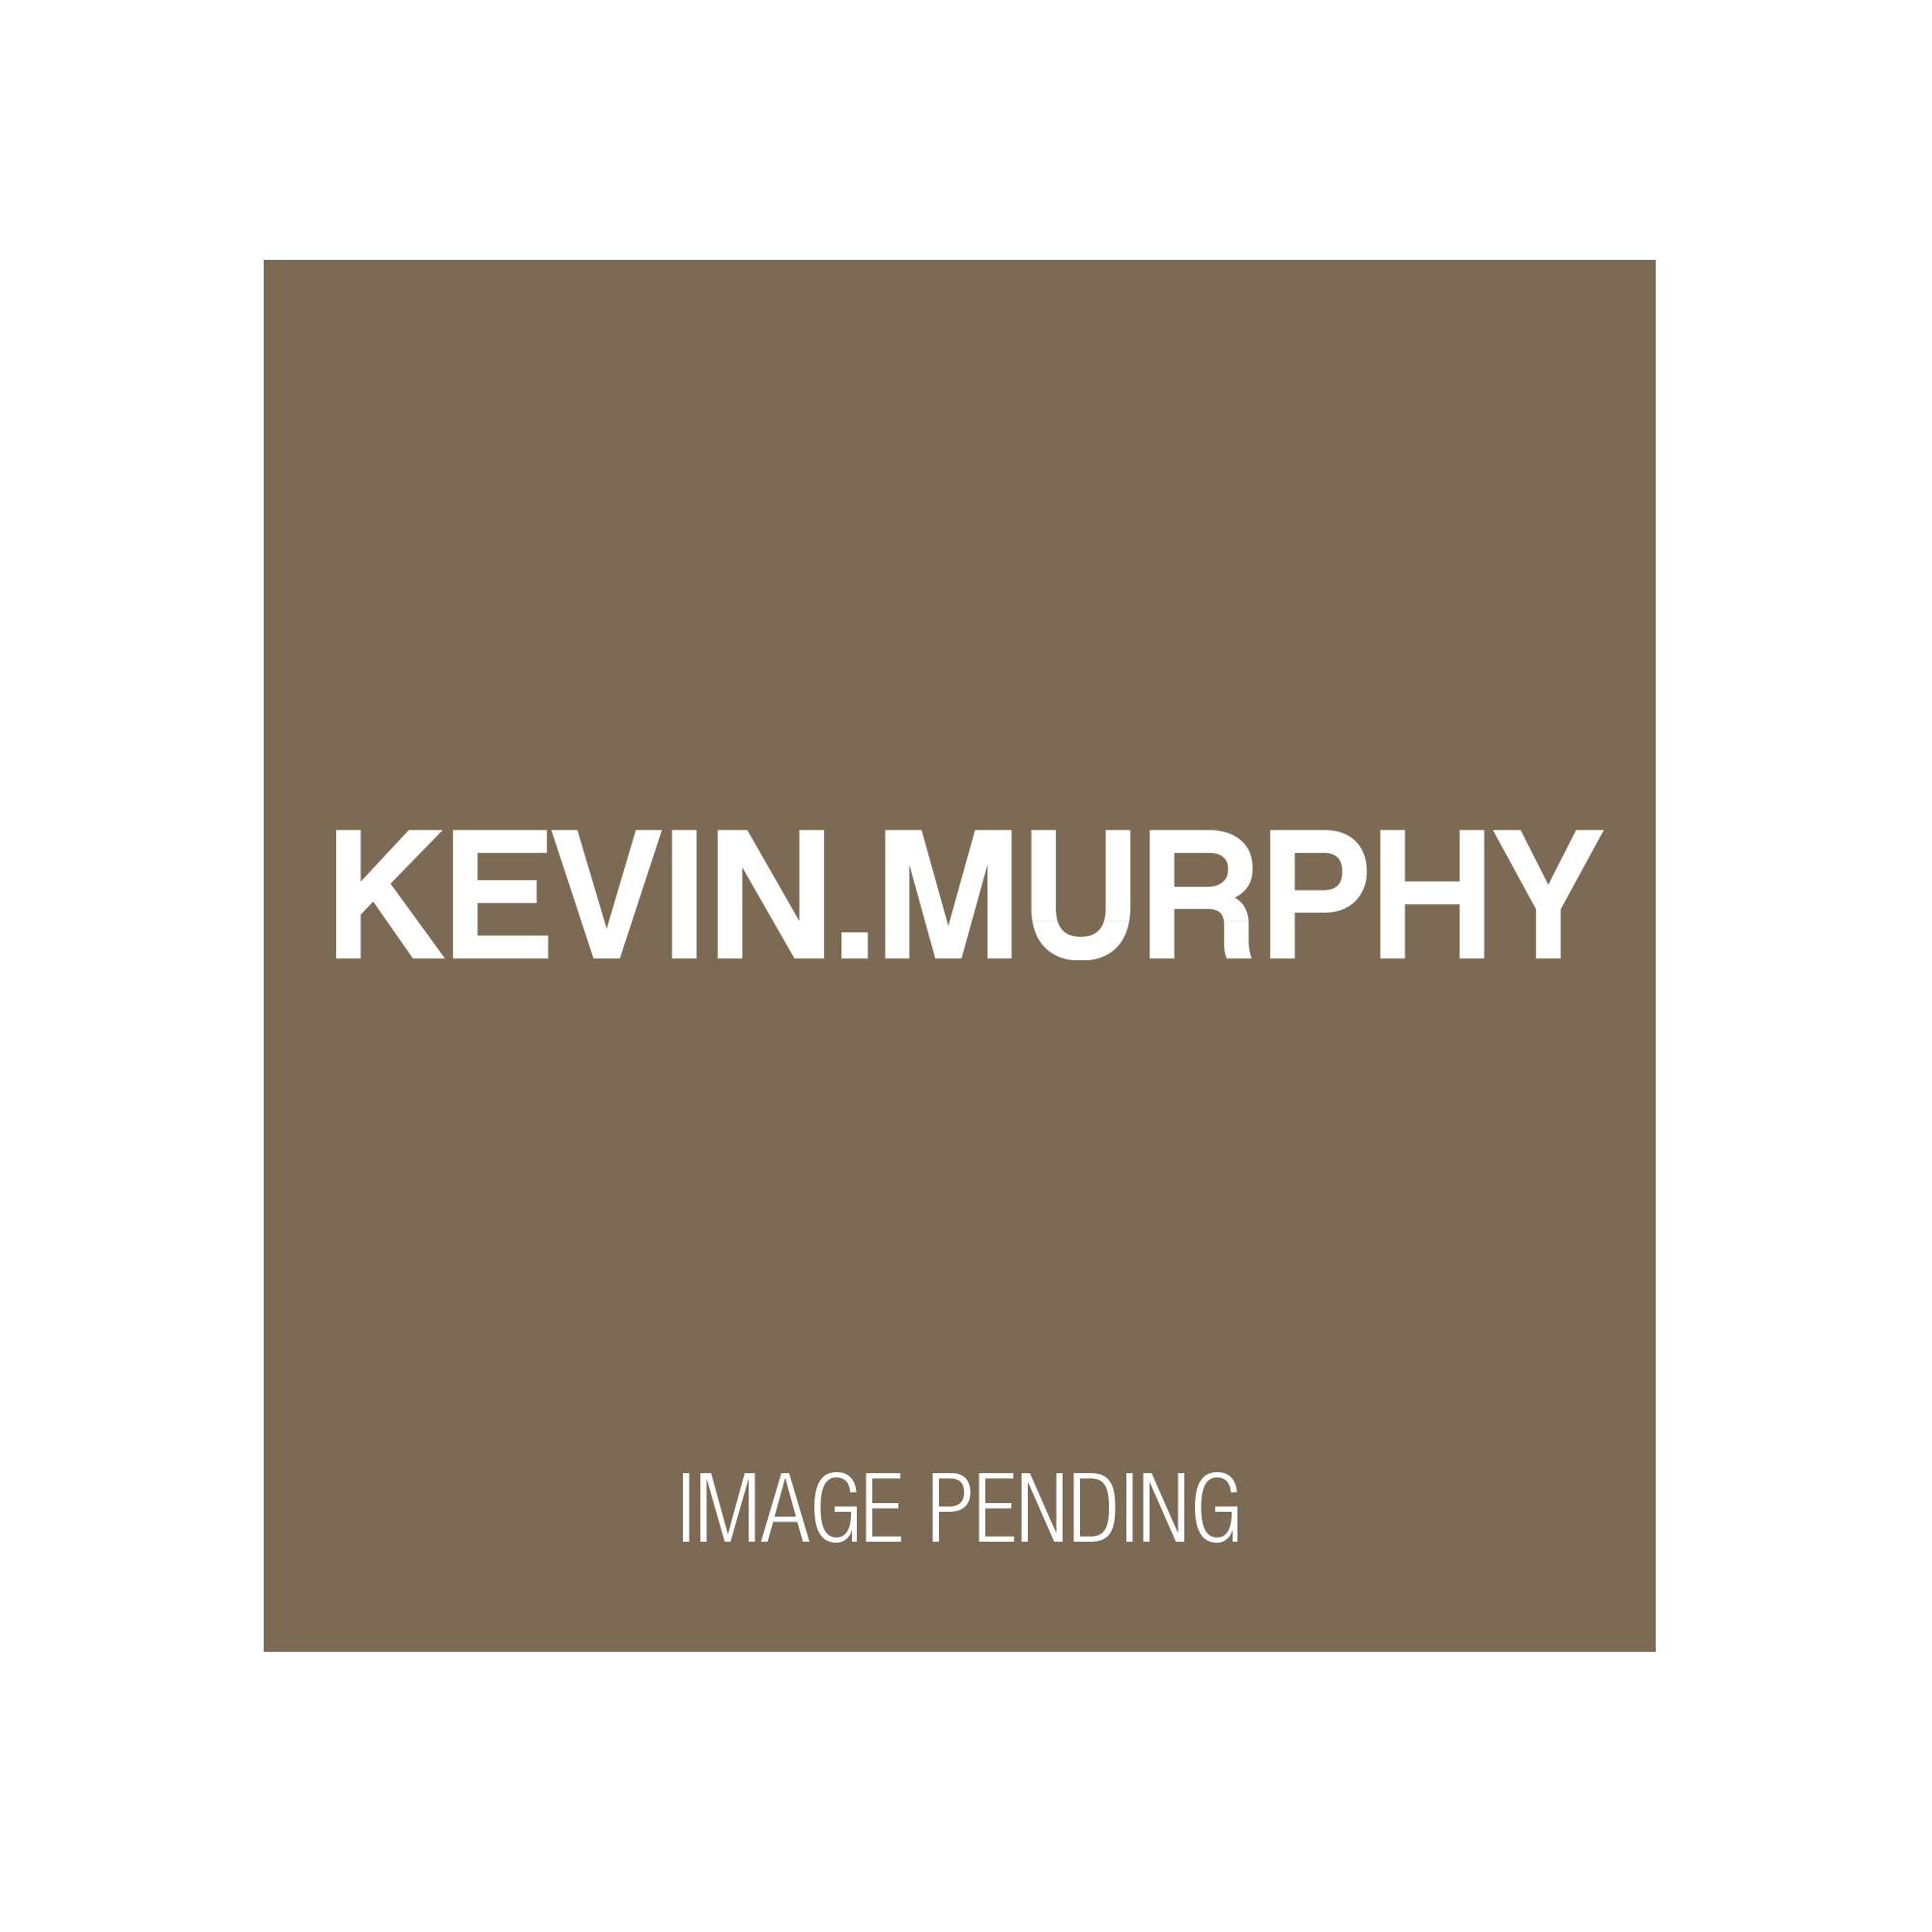 KEVIN.MURPHY Boot Box Display for Limited Edition 500ml